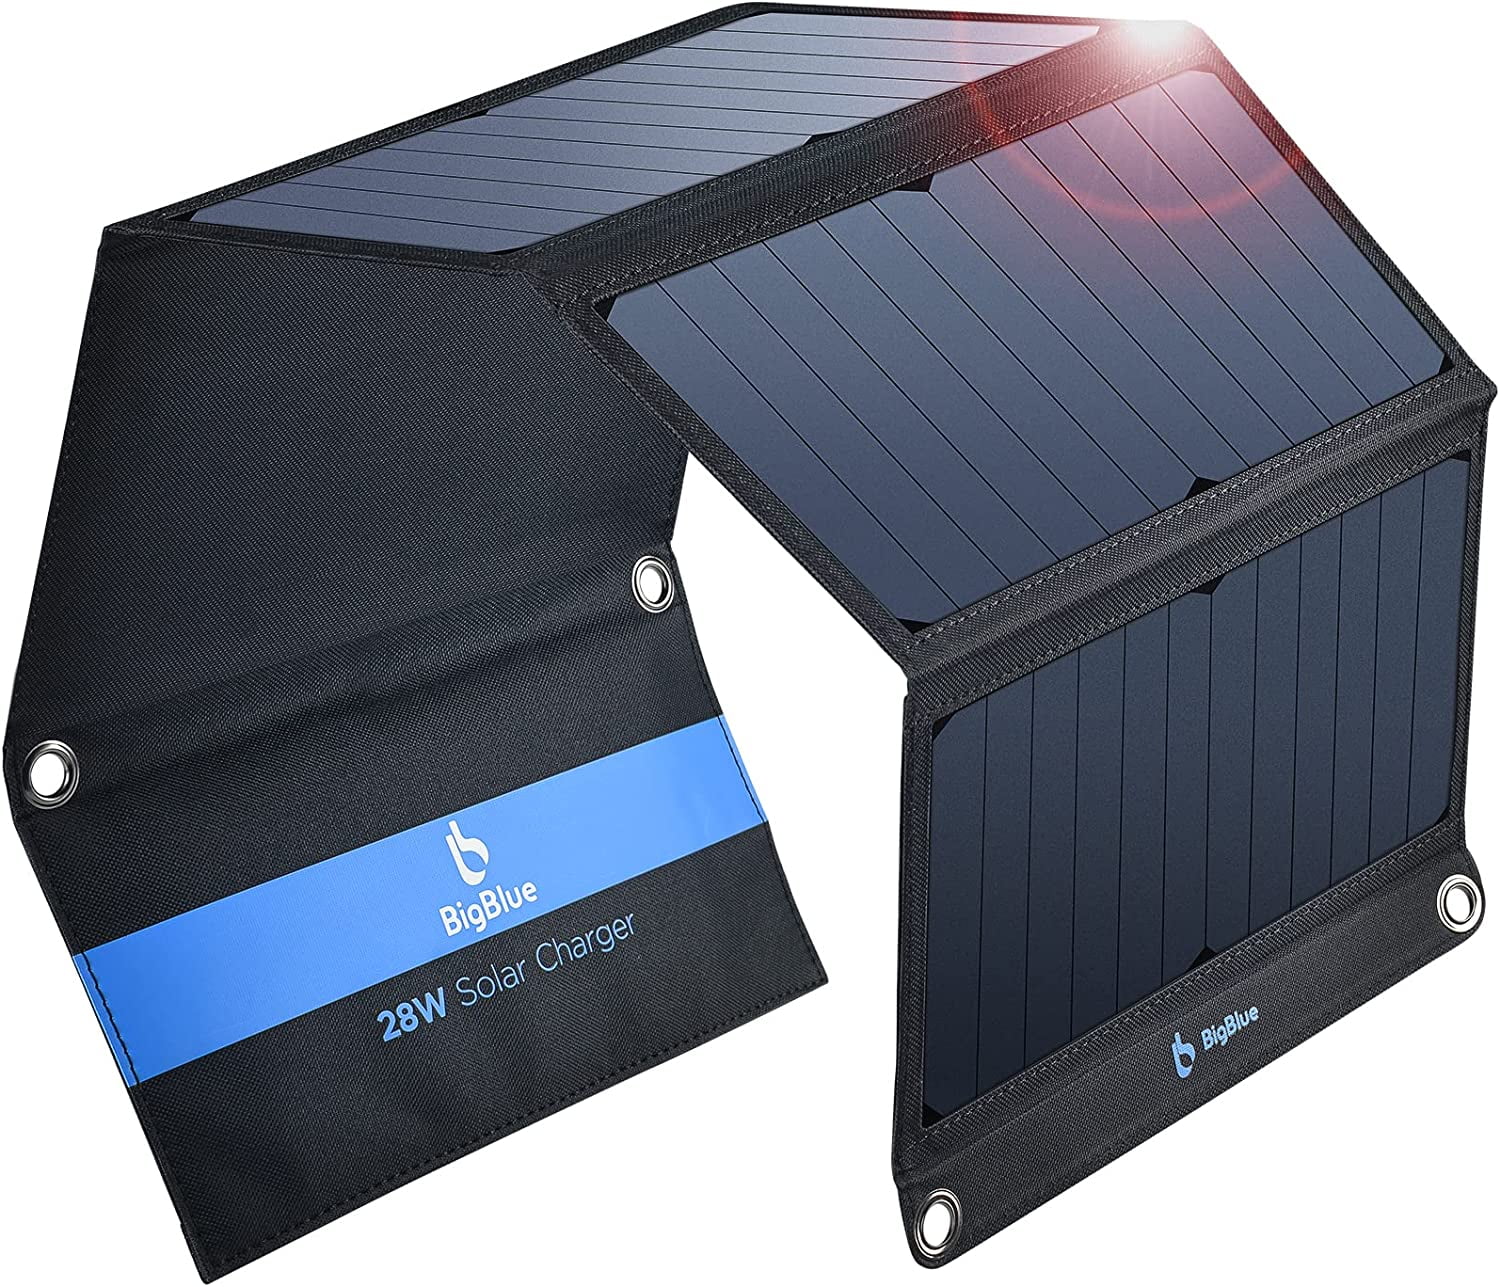 romantisch slinger Verdraaiing BigBlue 28W Solar Panel Charger, 3 USB Ports Portable Solar Panel with  SunPower, Solar Charger for Cell Phone Hiking Camping Emergency Outdoors -  Walmart.com